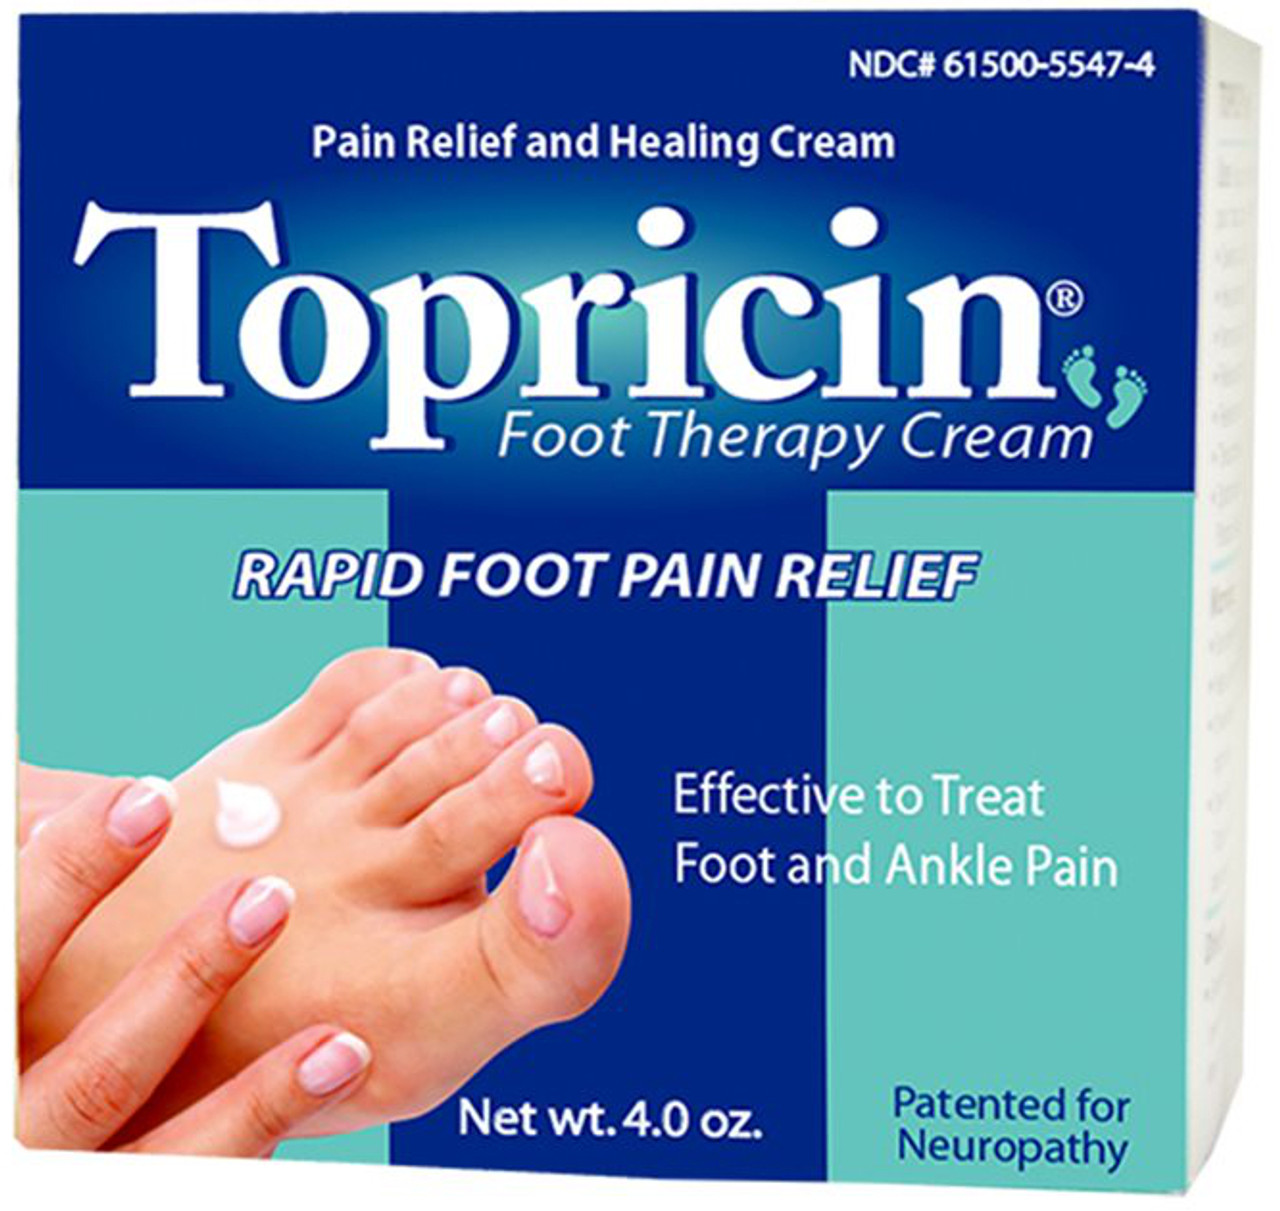 Topricin foot pain relief cream - 4 oz | ACG Medical Supply